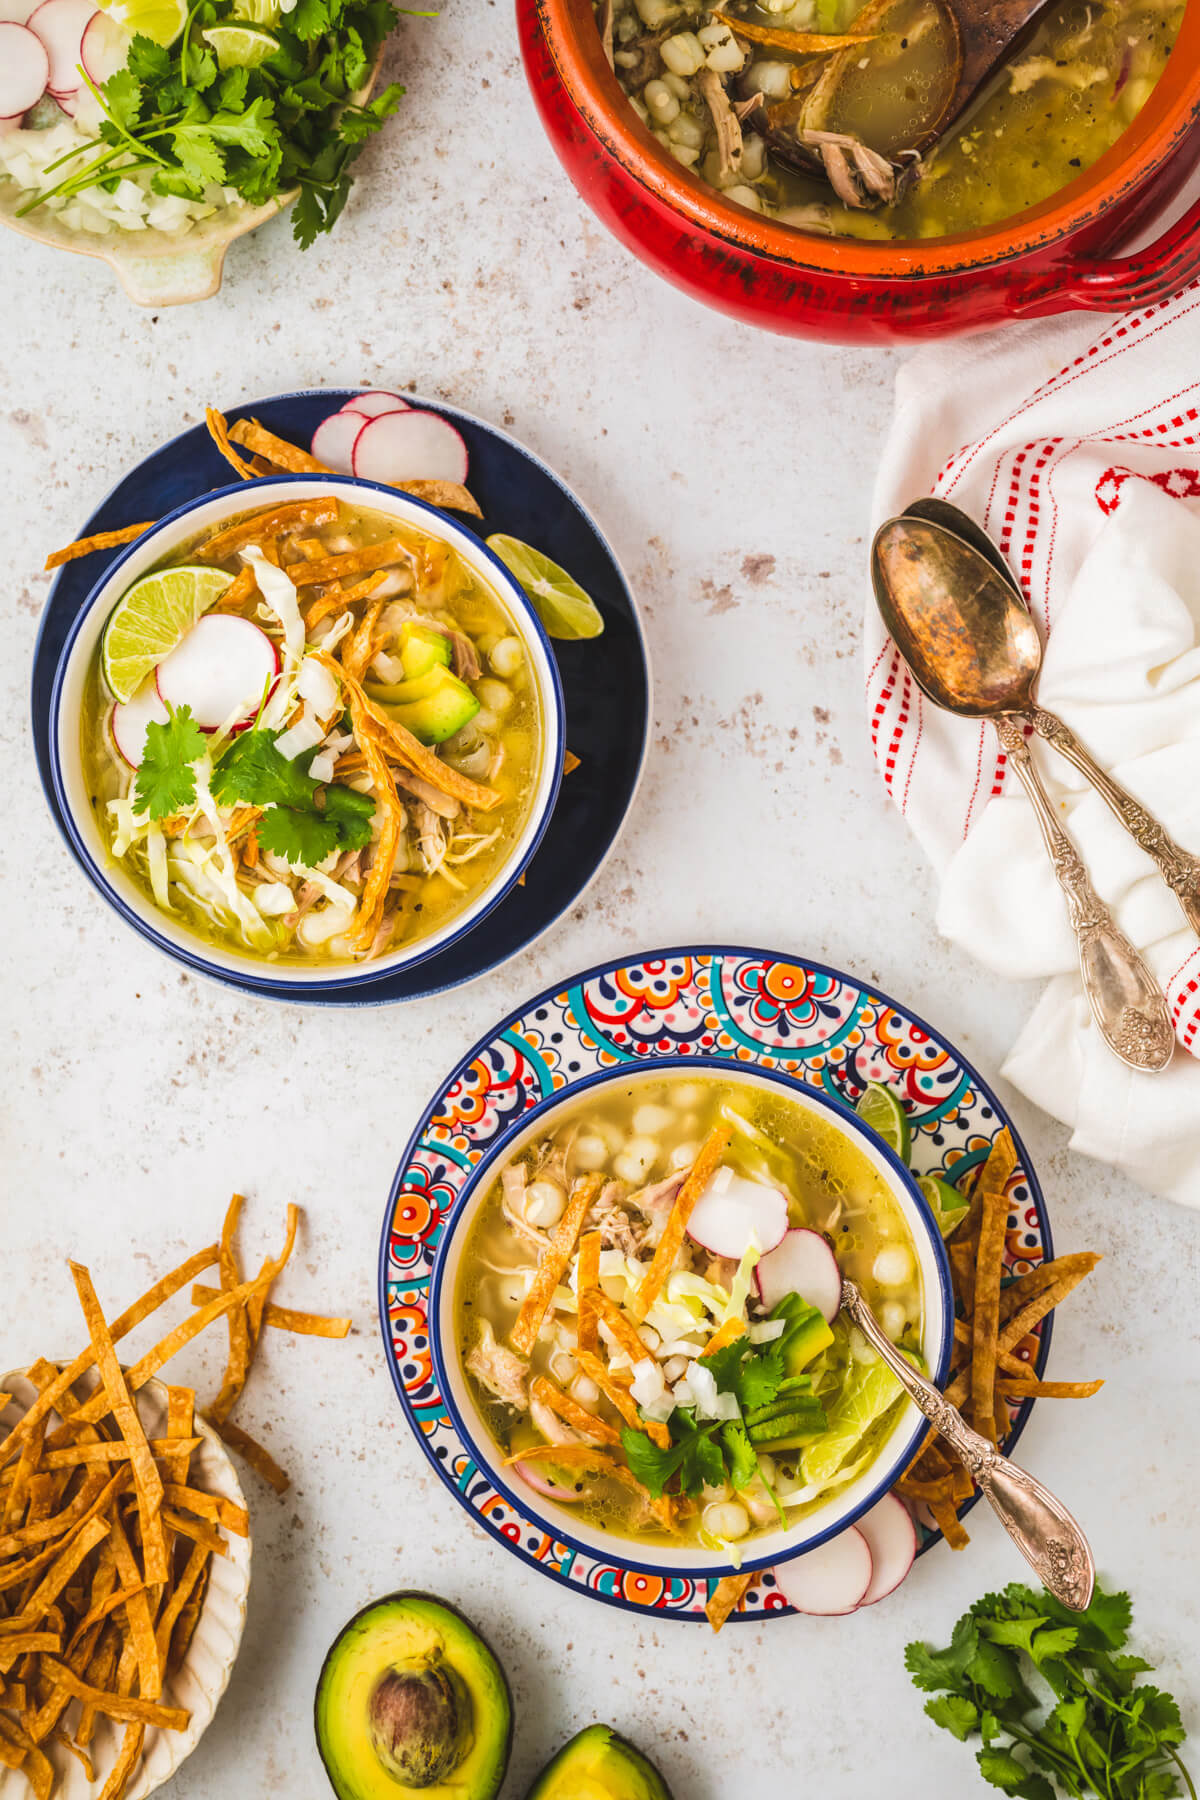 A table scene featuring two colourful soup bowls containing Pozole blanco featuring white hominy, cilantro, radishes, cabbage, lime wedge, and strips of fried tortilla.